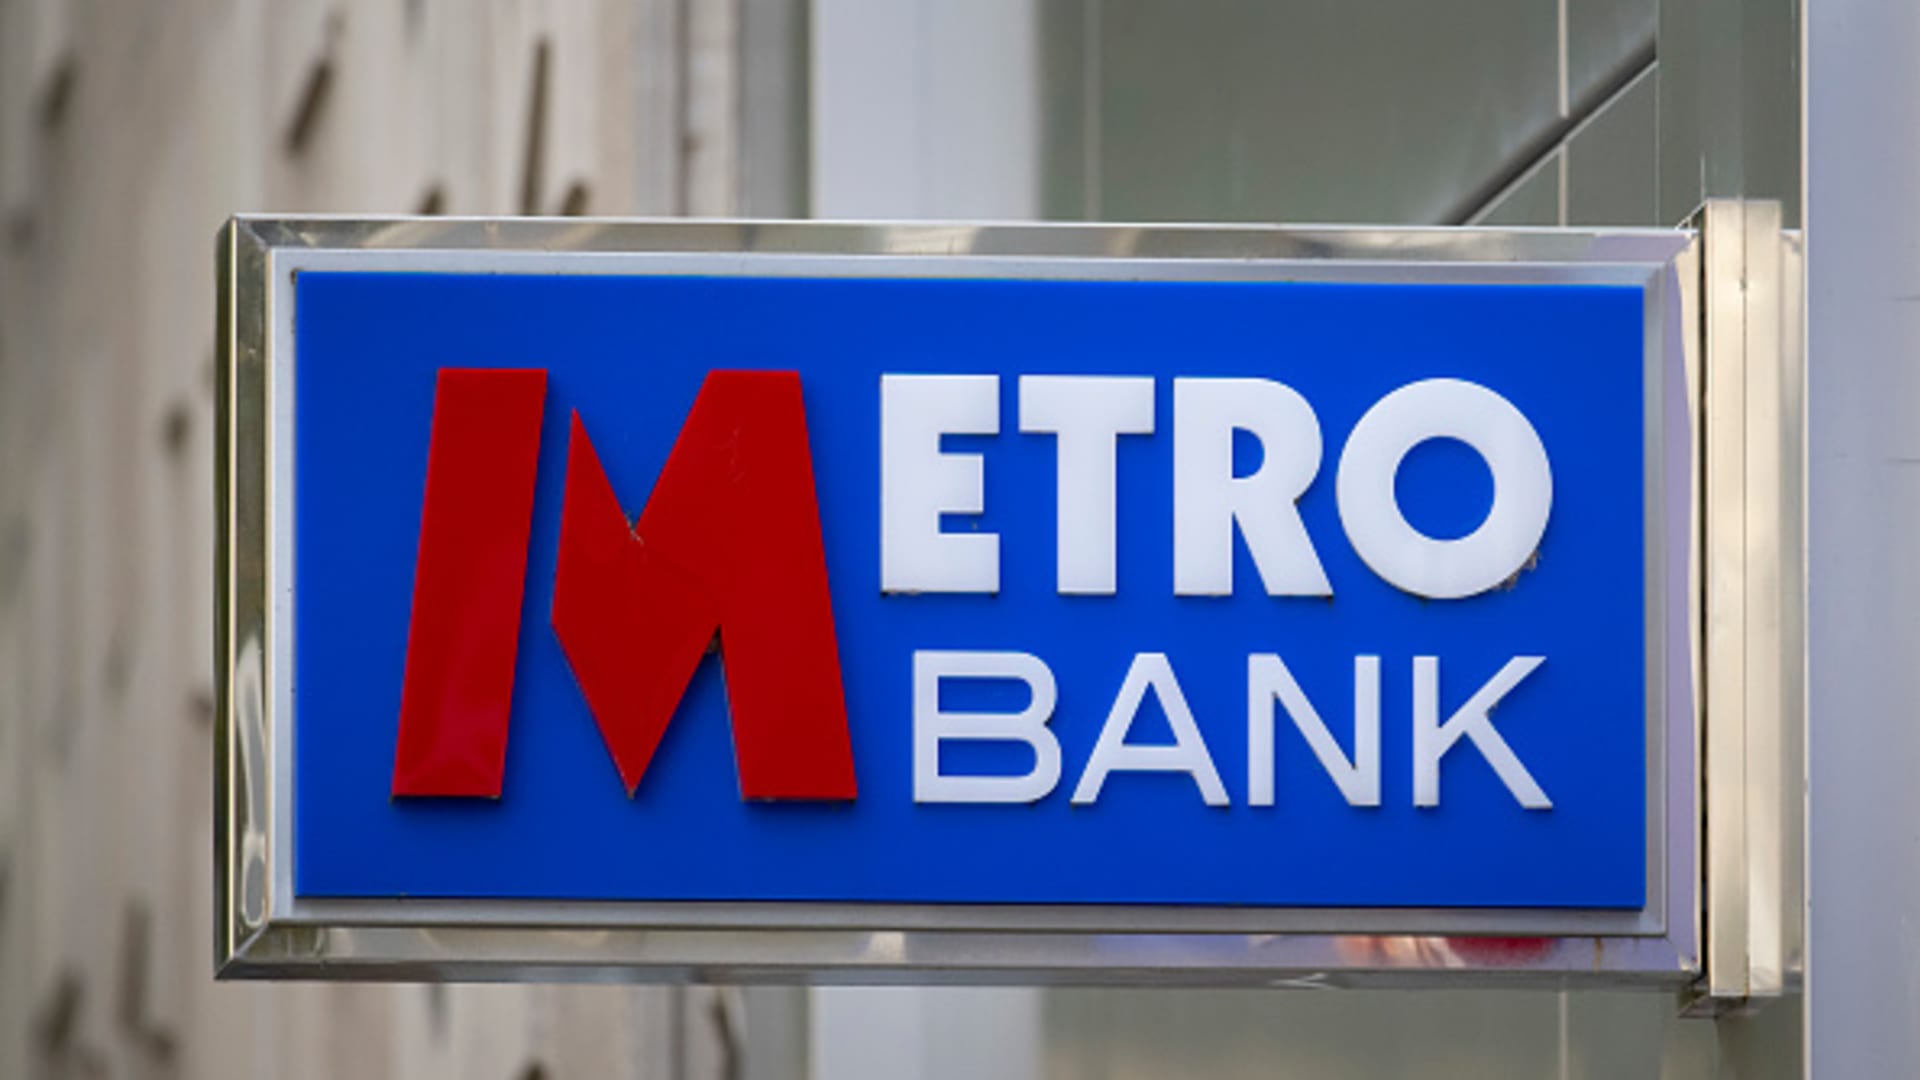 Shares of UK’s Metro Bank up 26% after securing fresh capital